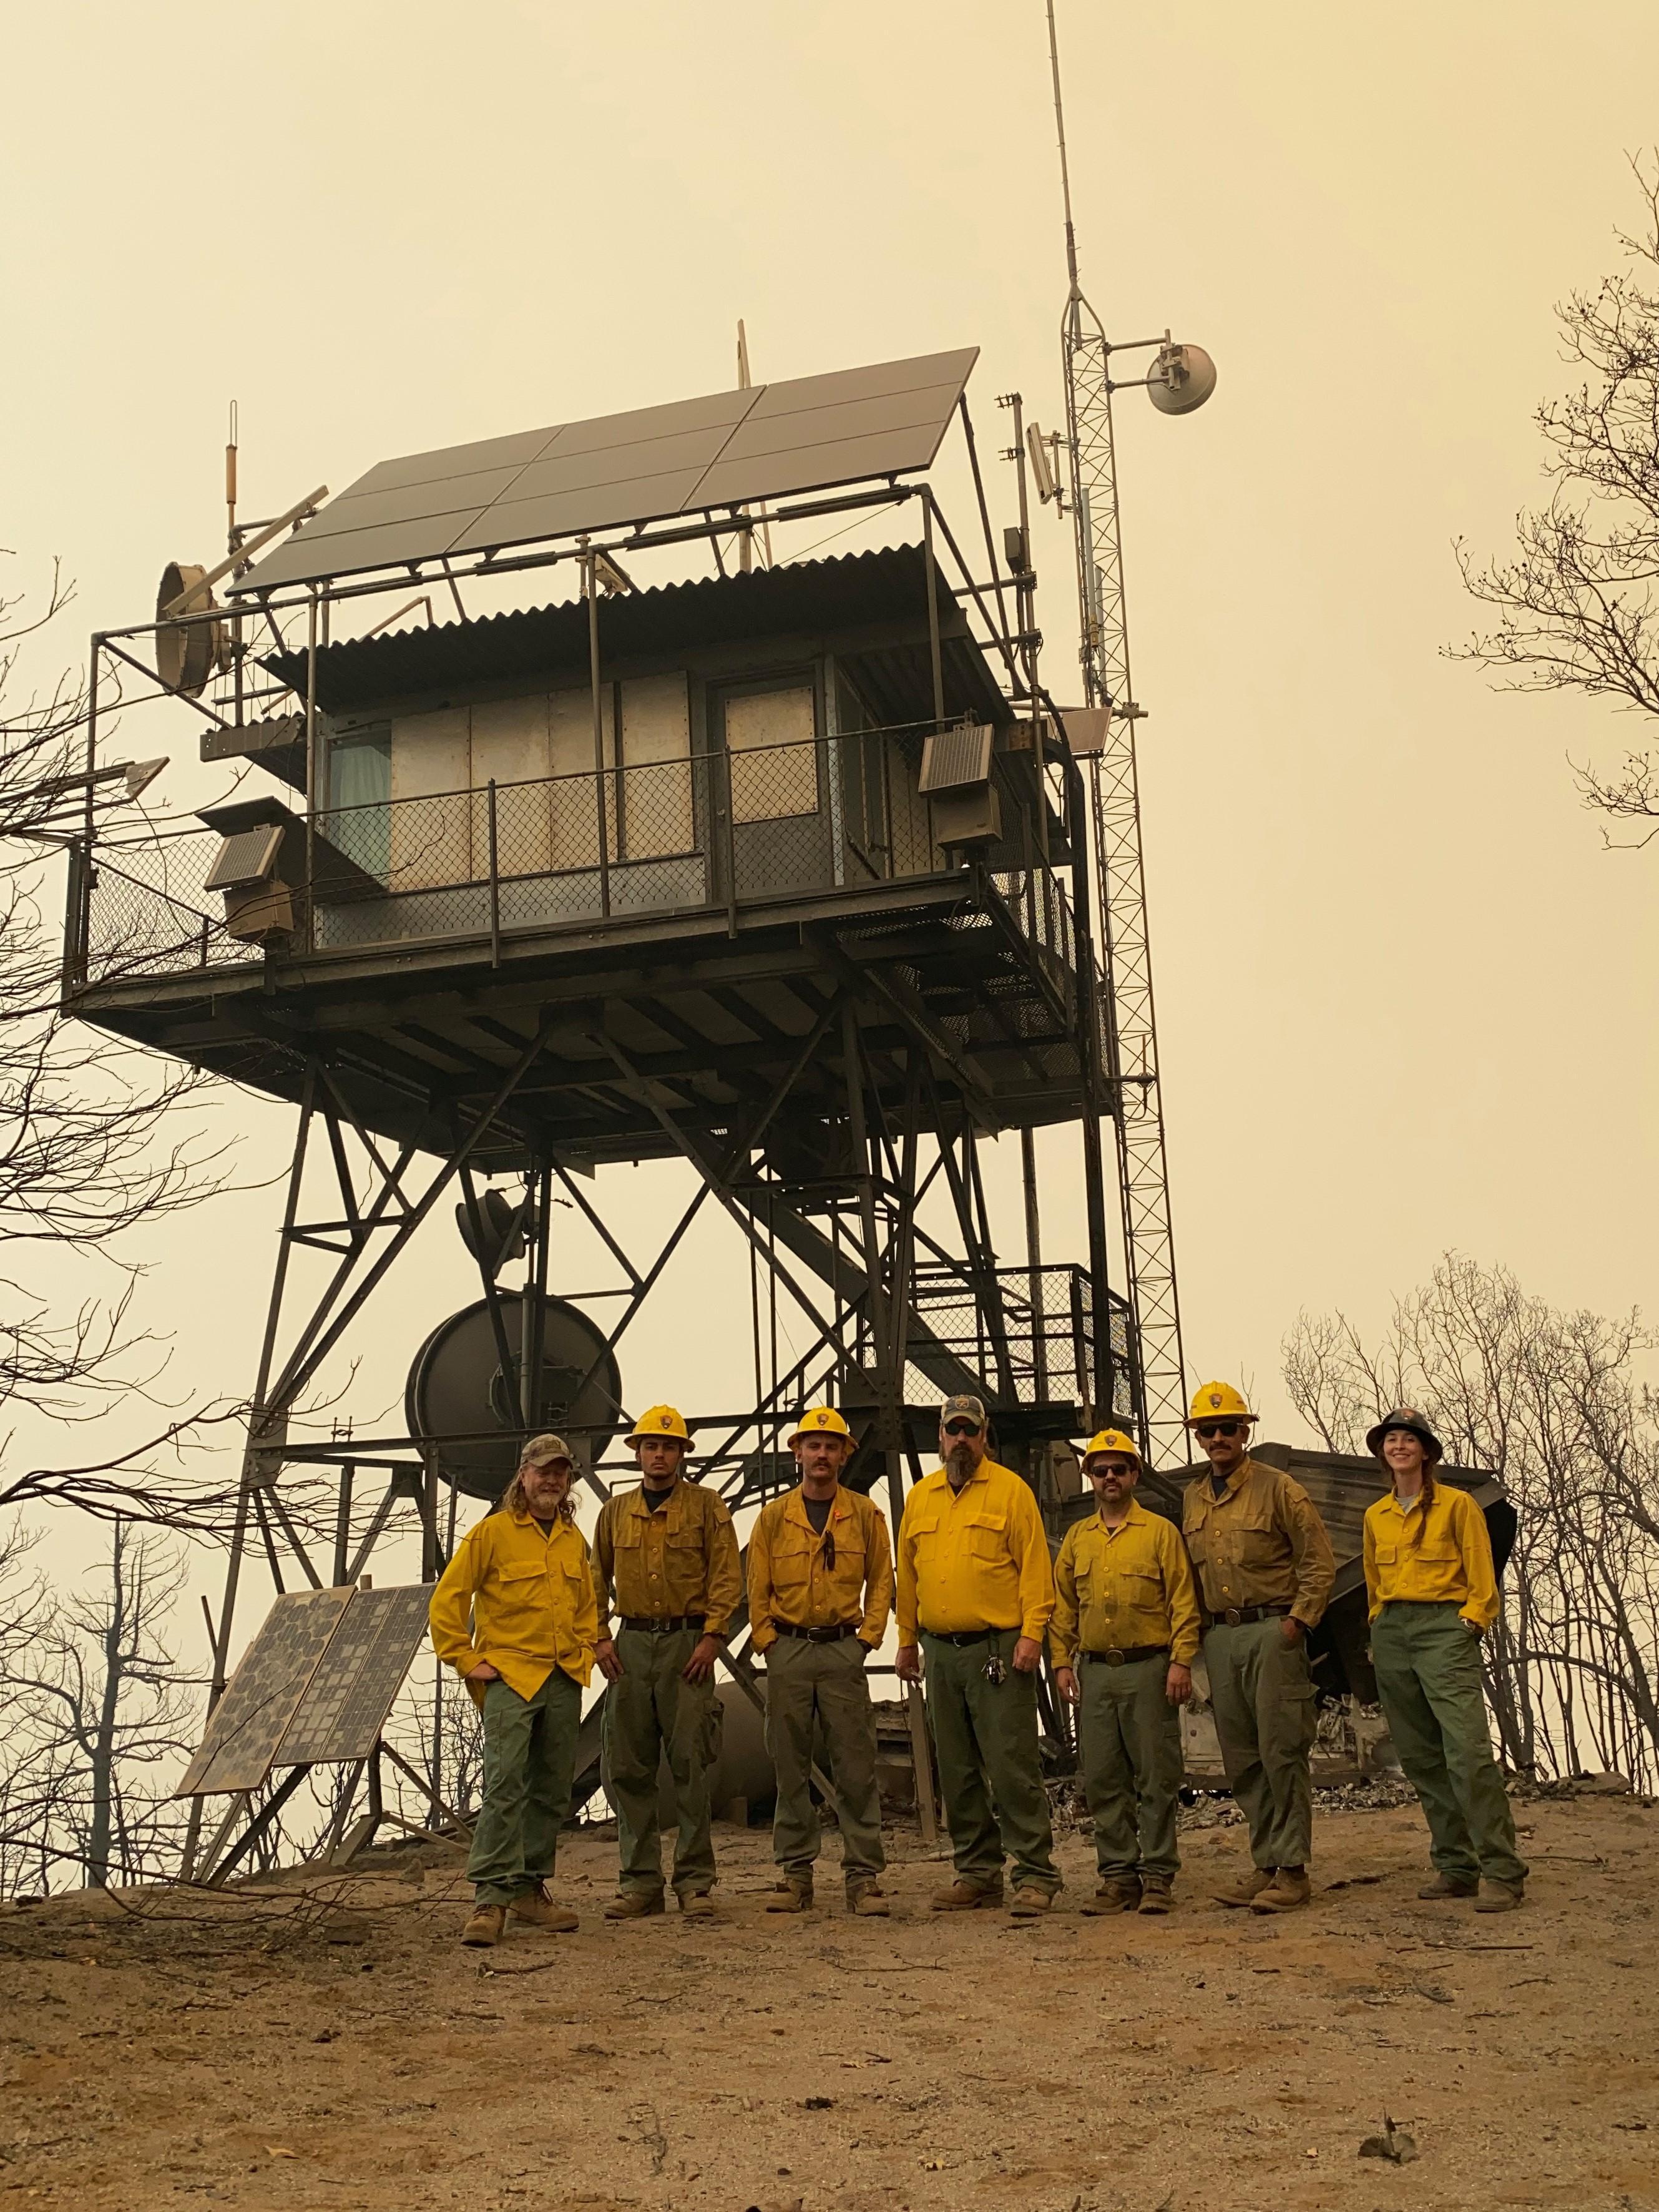 A crew stands below a radio and fire tower on a smoky day